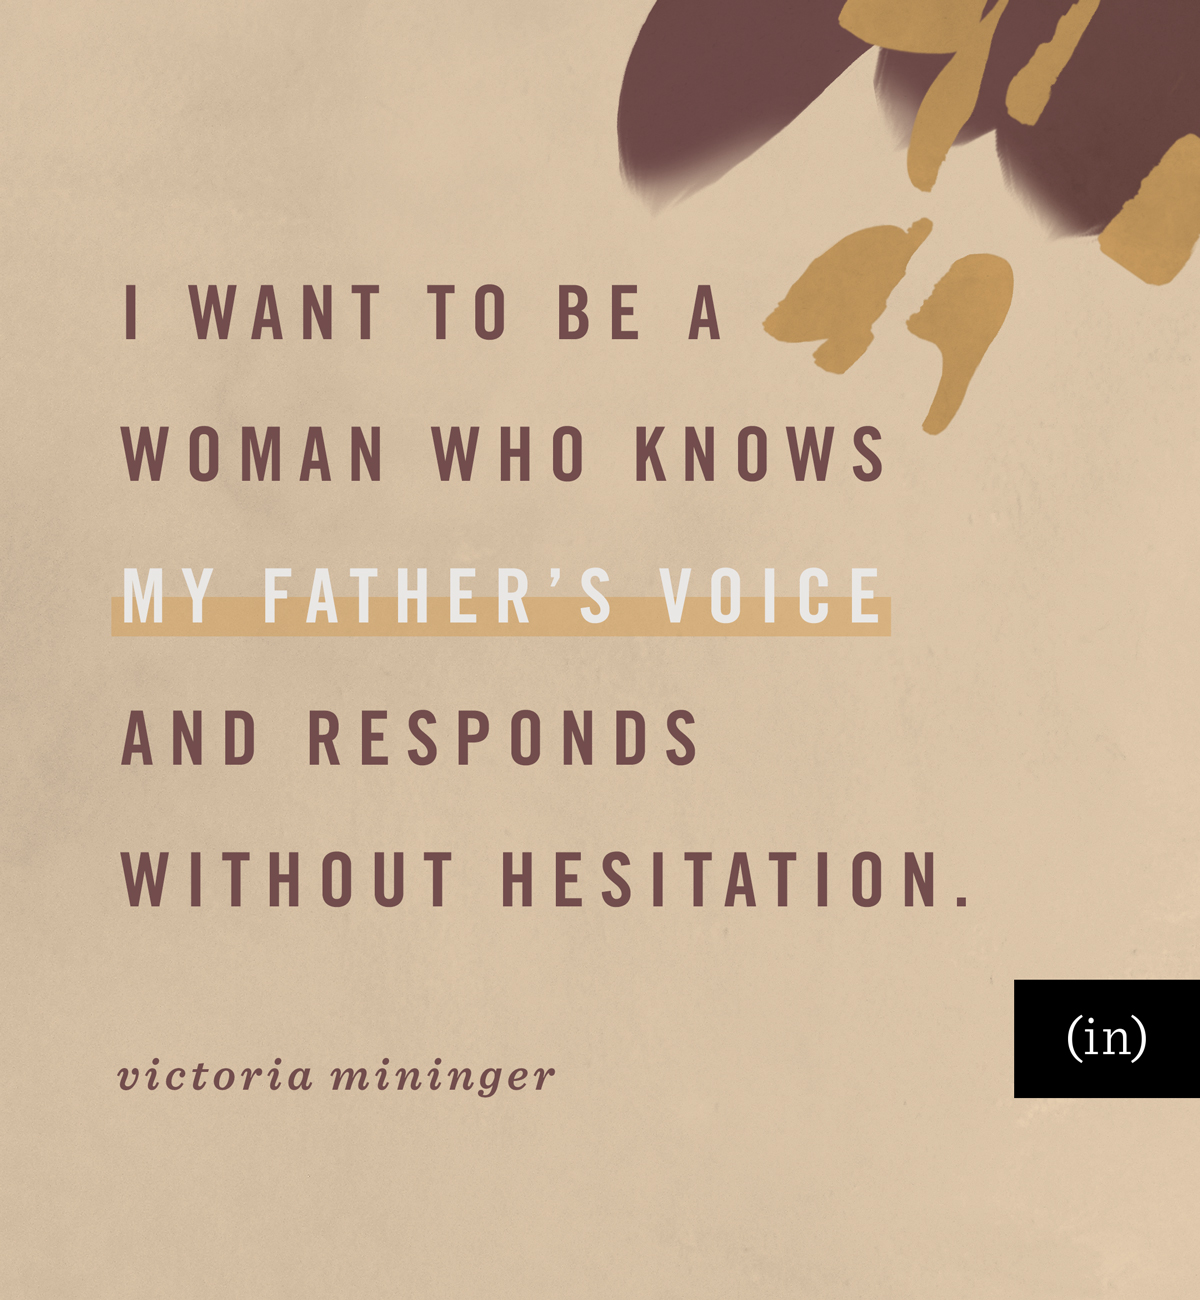 I want to be a woman who knows my Father’s voice and responds without hesitation. -Victoria Mininger